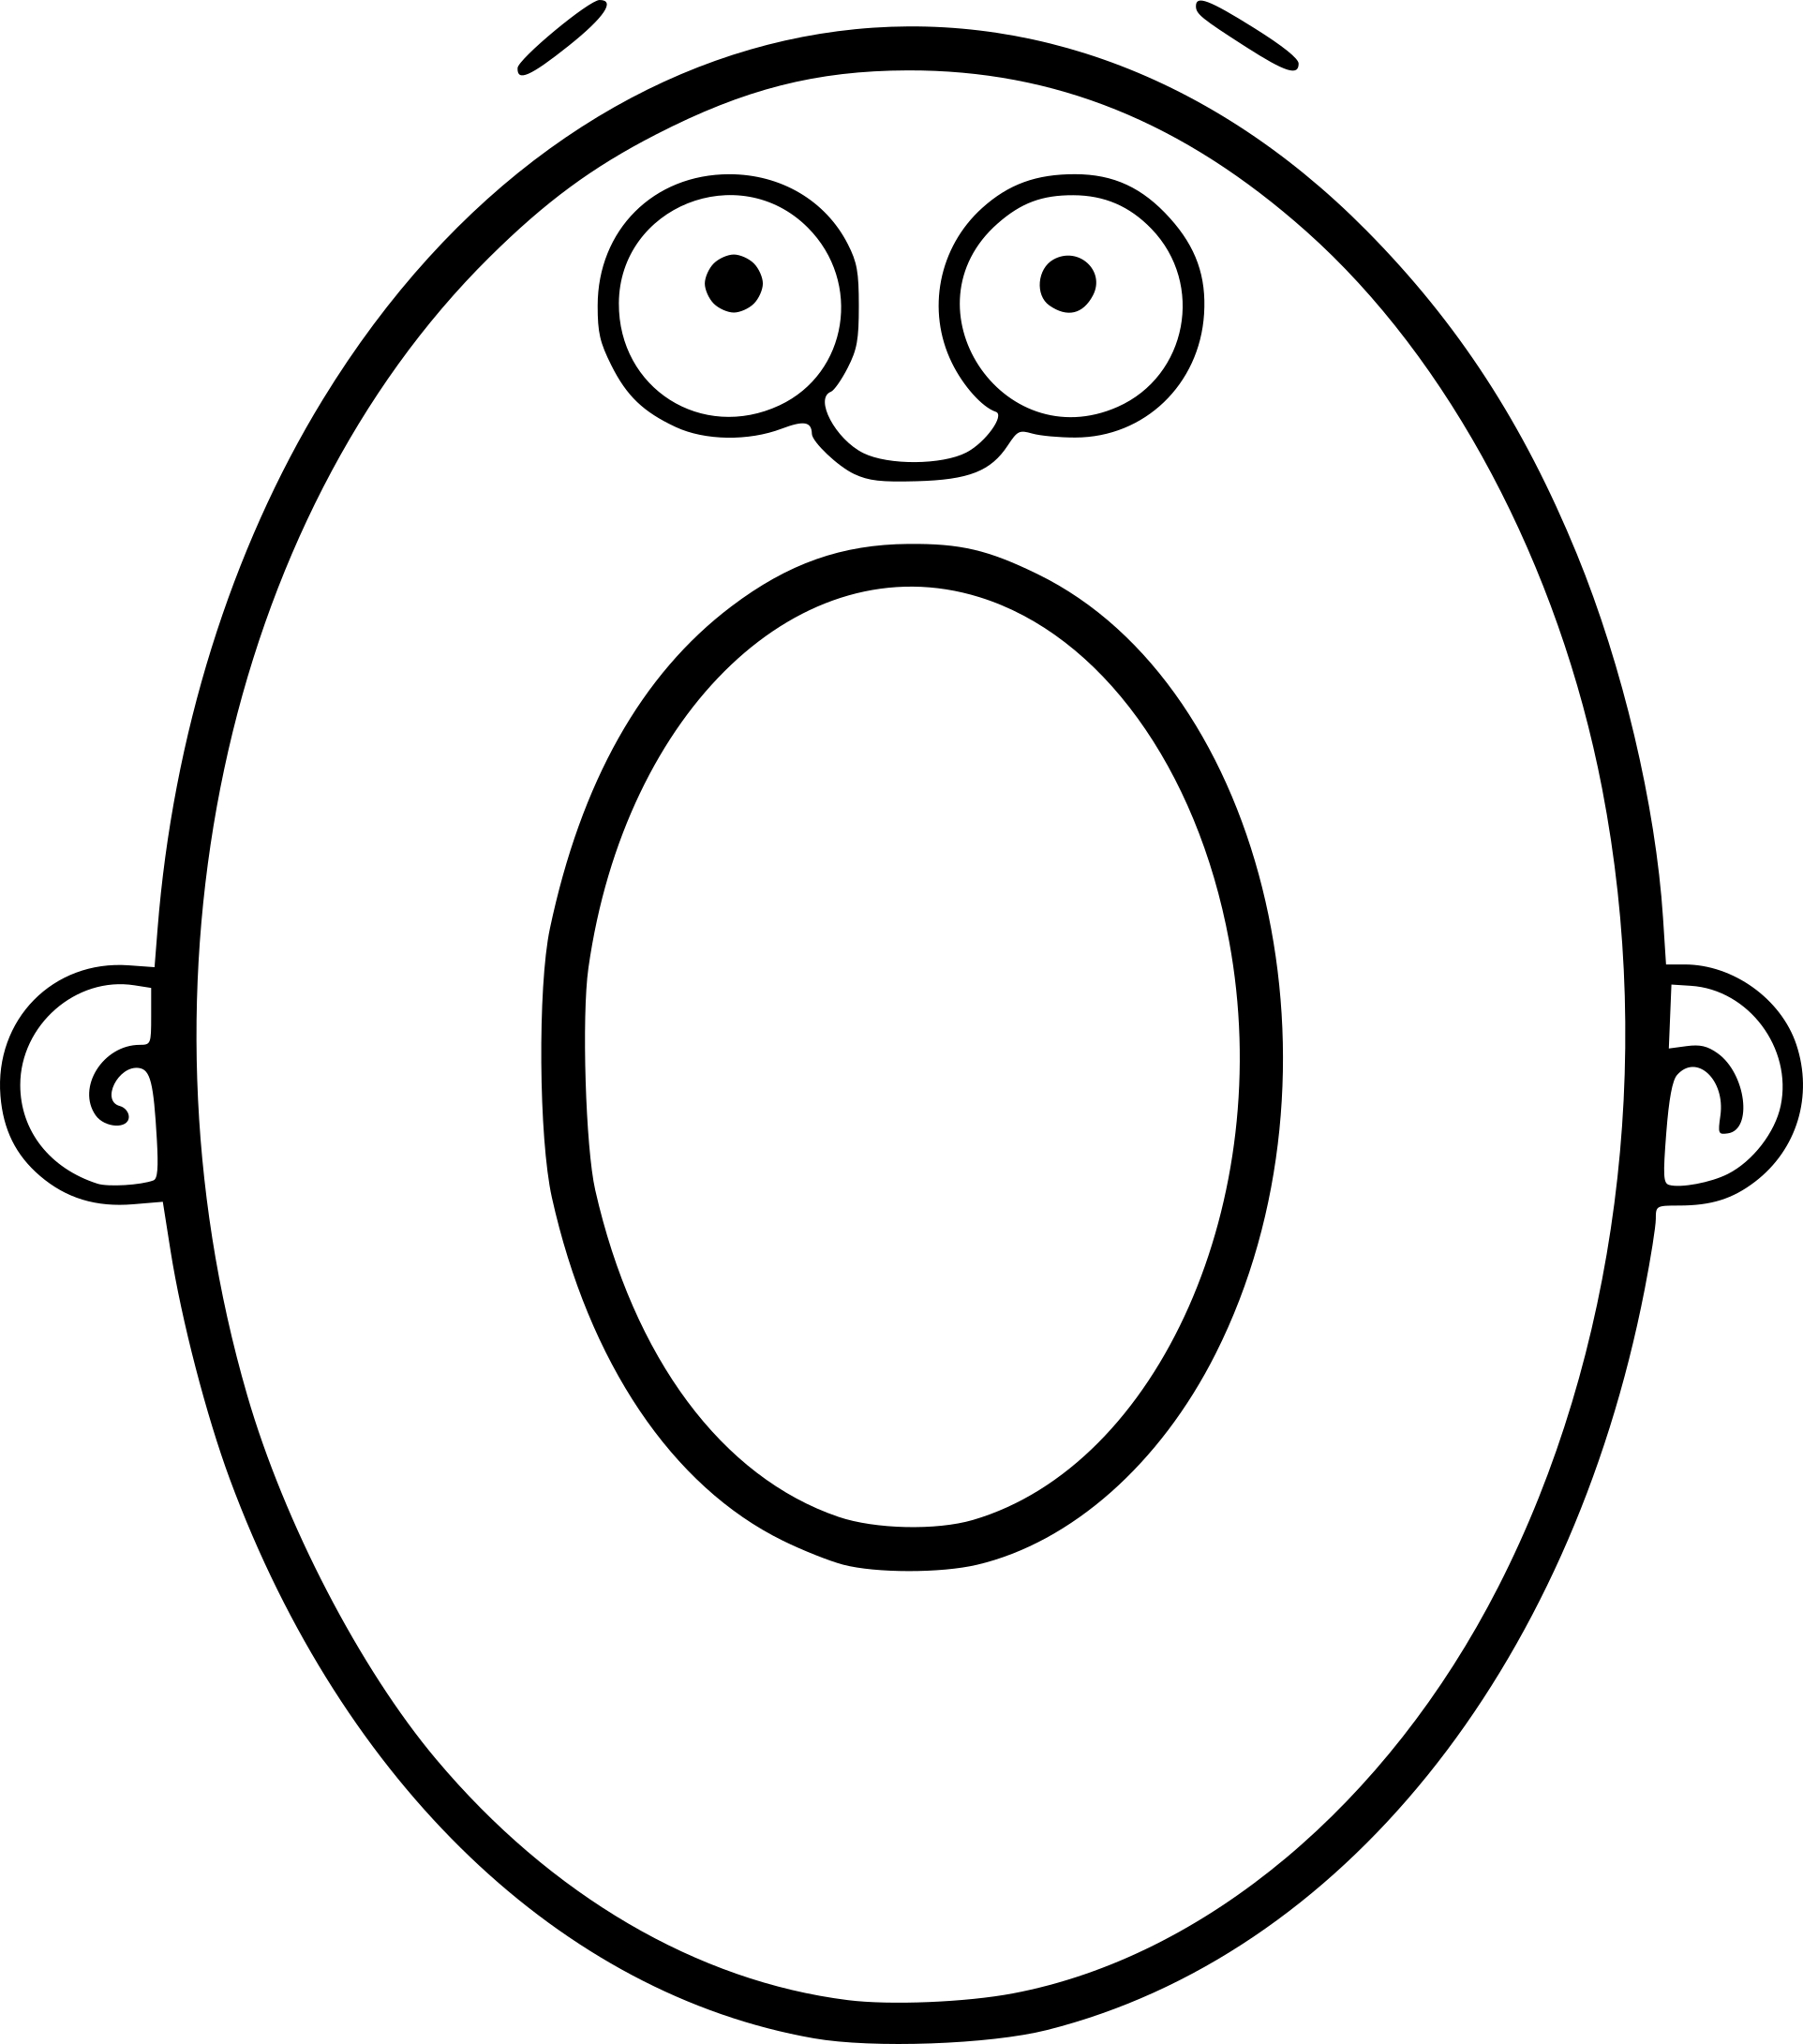 Number 0 coloring page